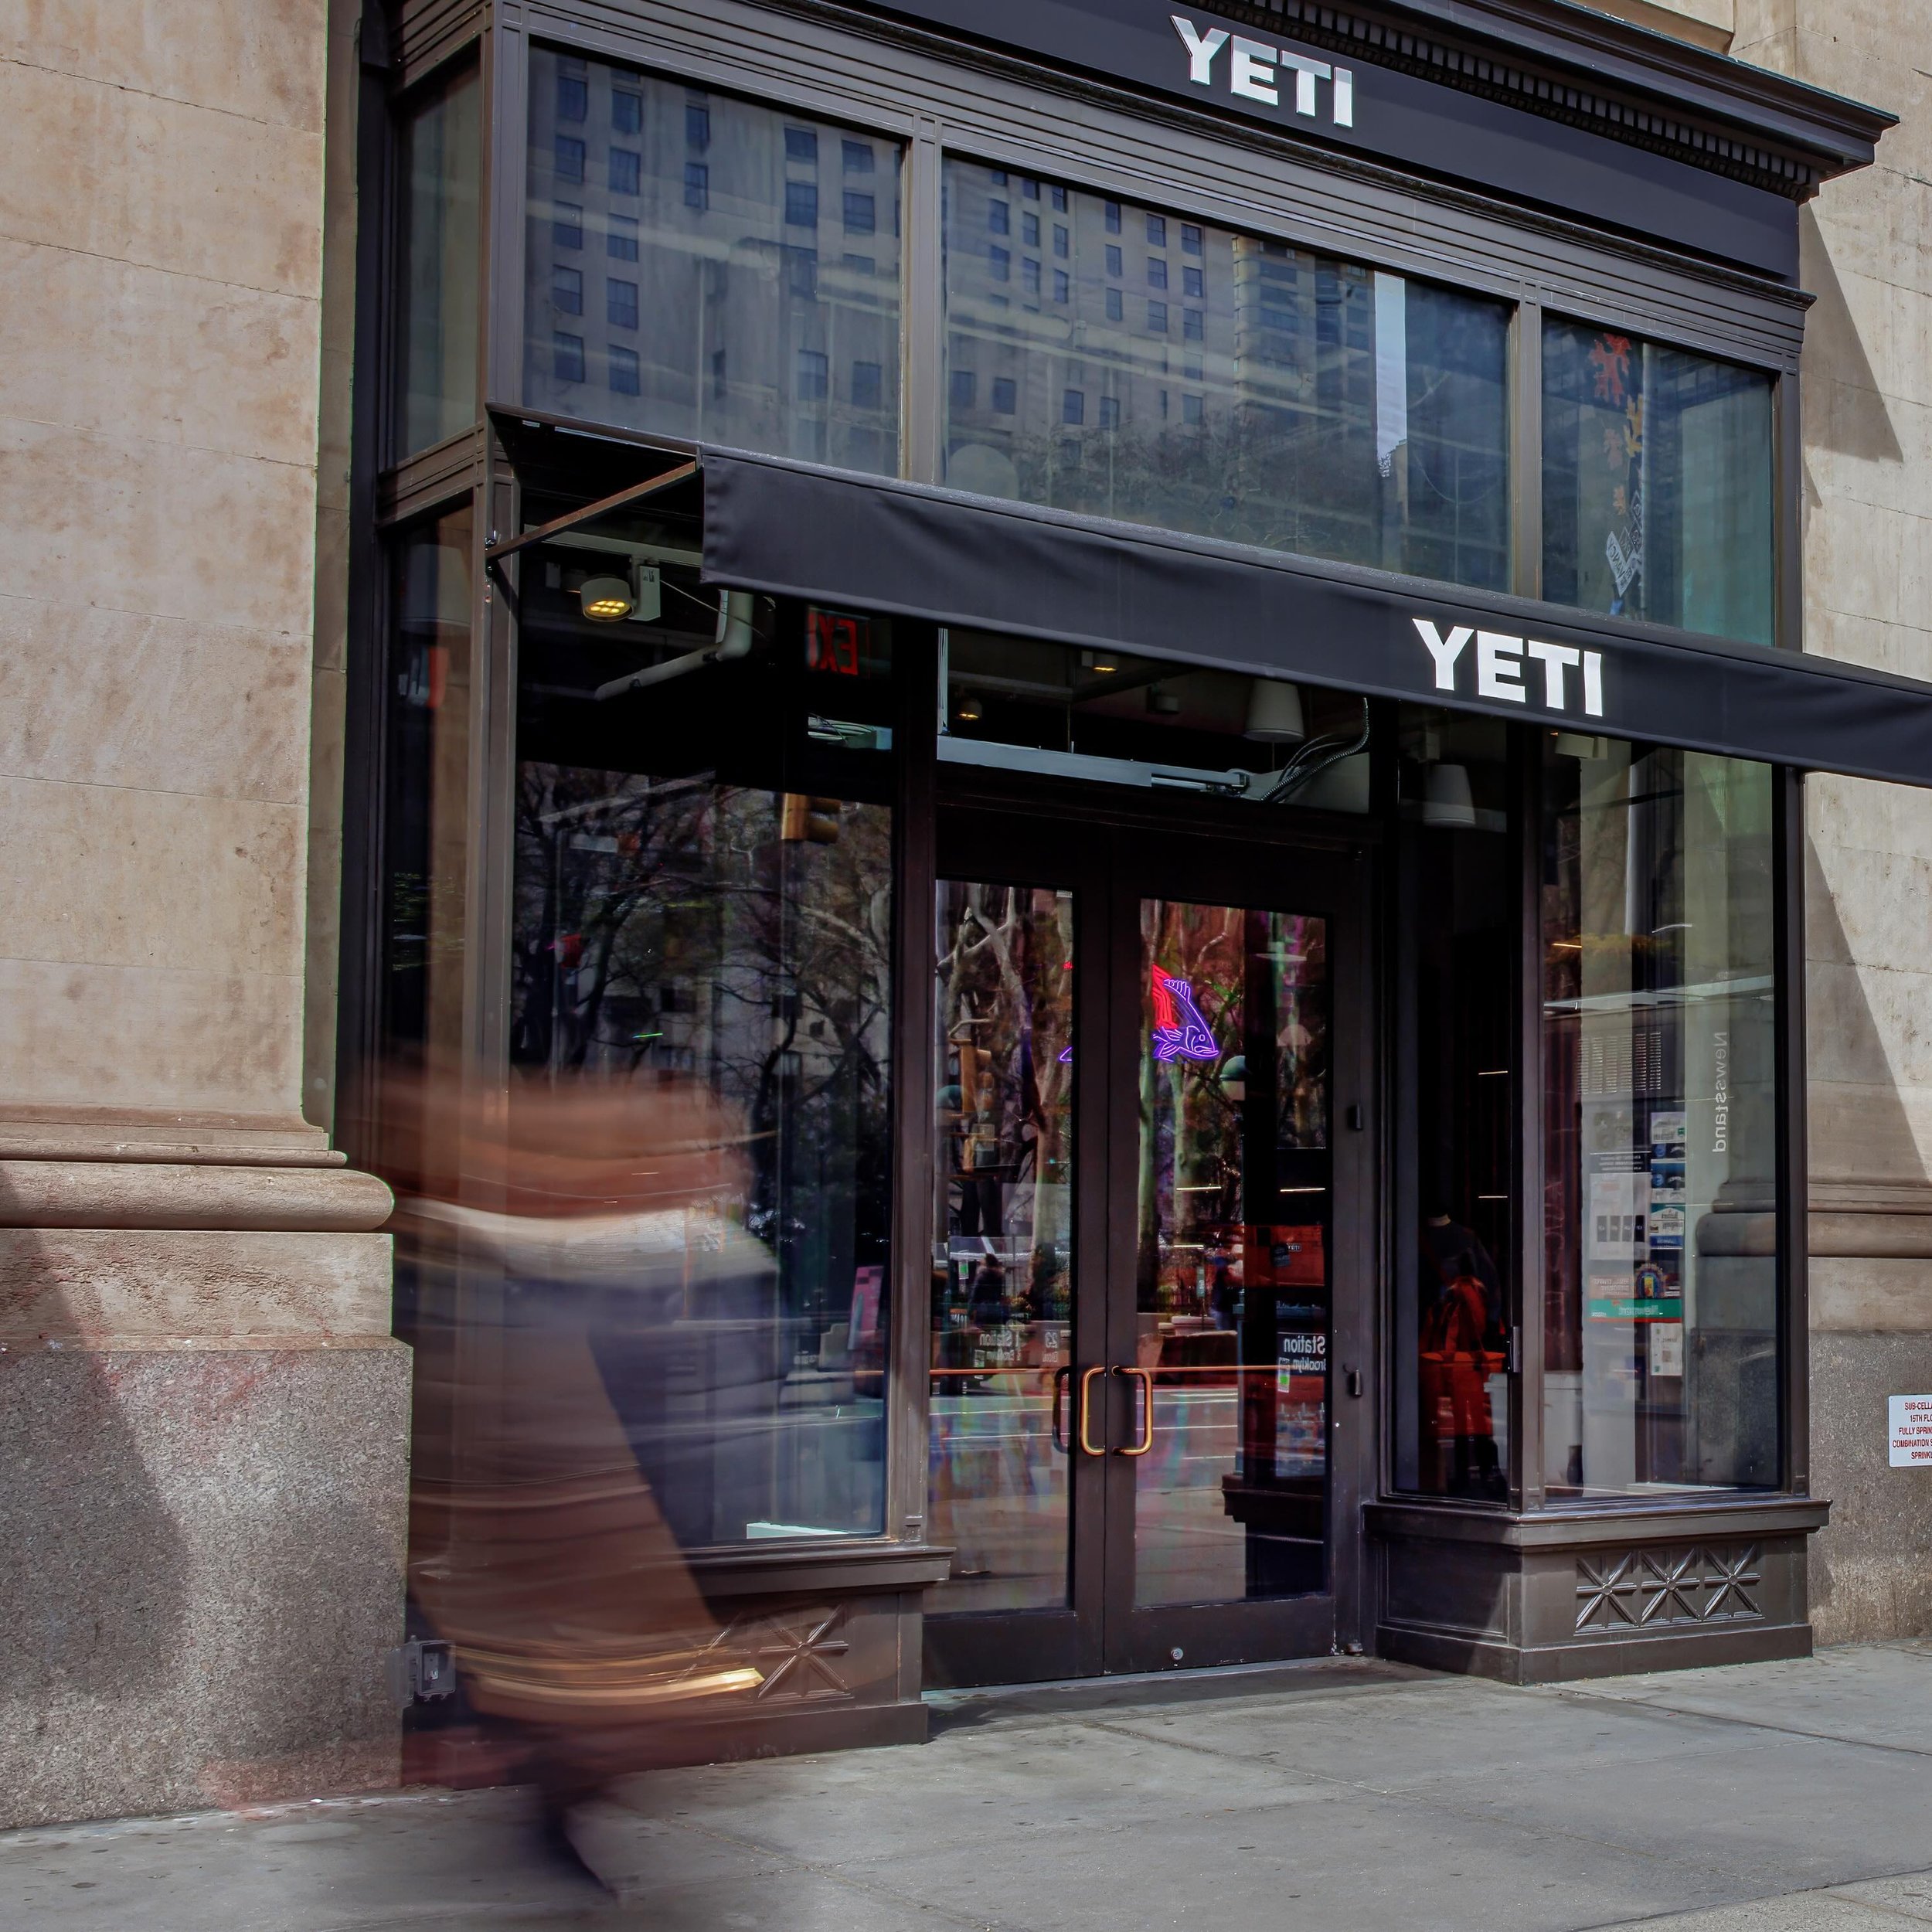 Back from a long one in NYC! We are stoked to have this one up and running in the Flatiron District. We even skirted the delays caused by the earthquake by a few hours! 

We&rsquo;ve got a lot more to come on this one!
.
.
.
.

#yeti #yetistore #reta